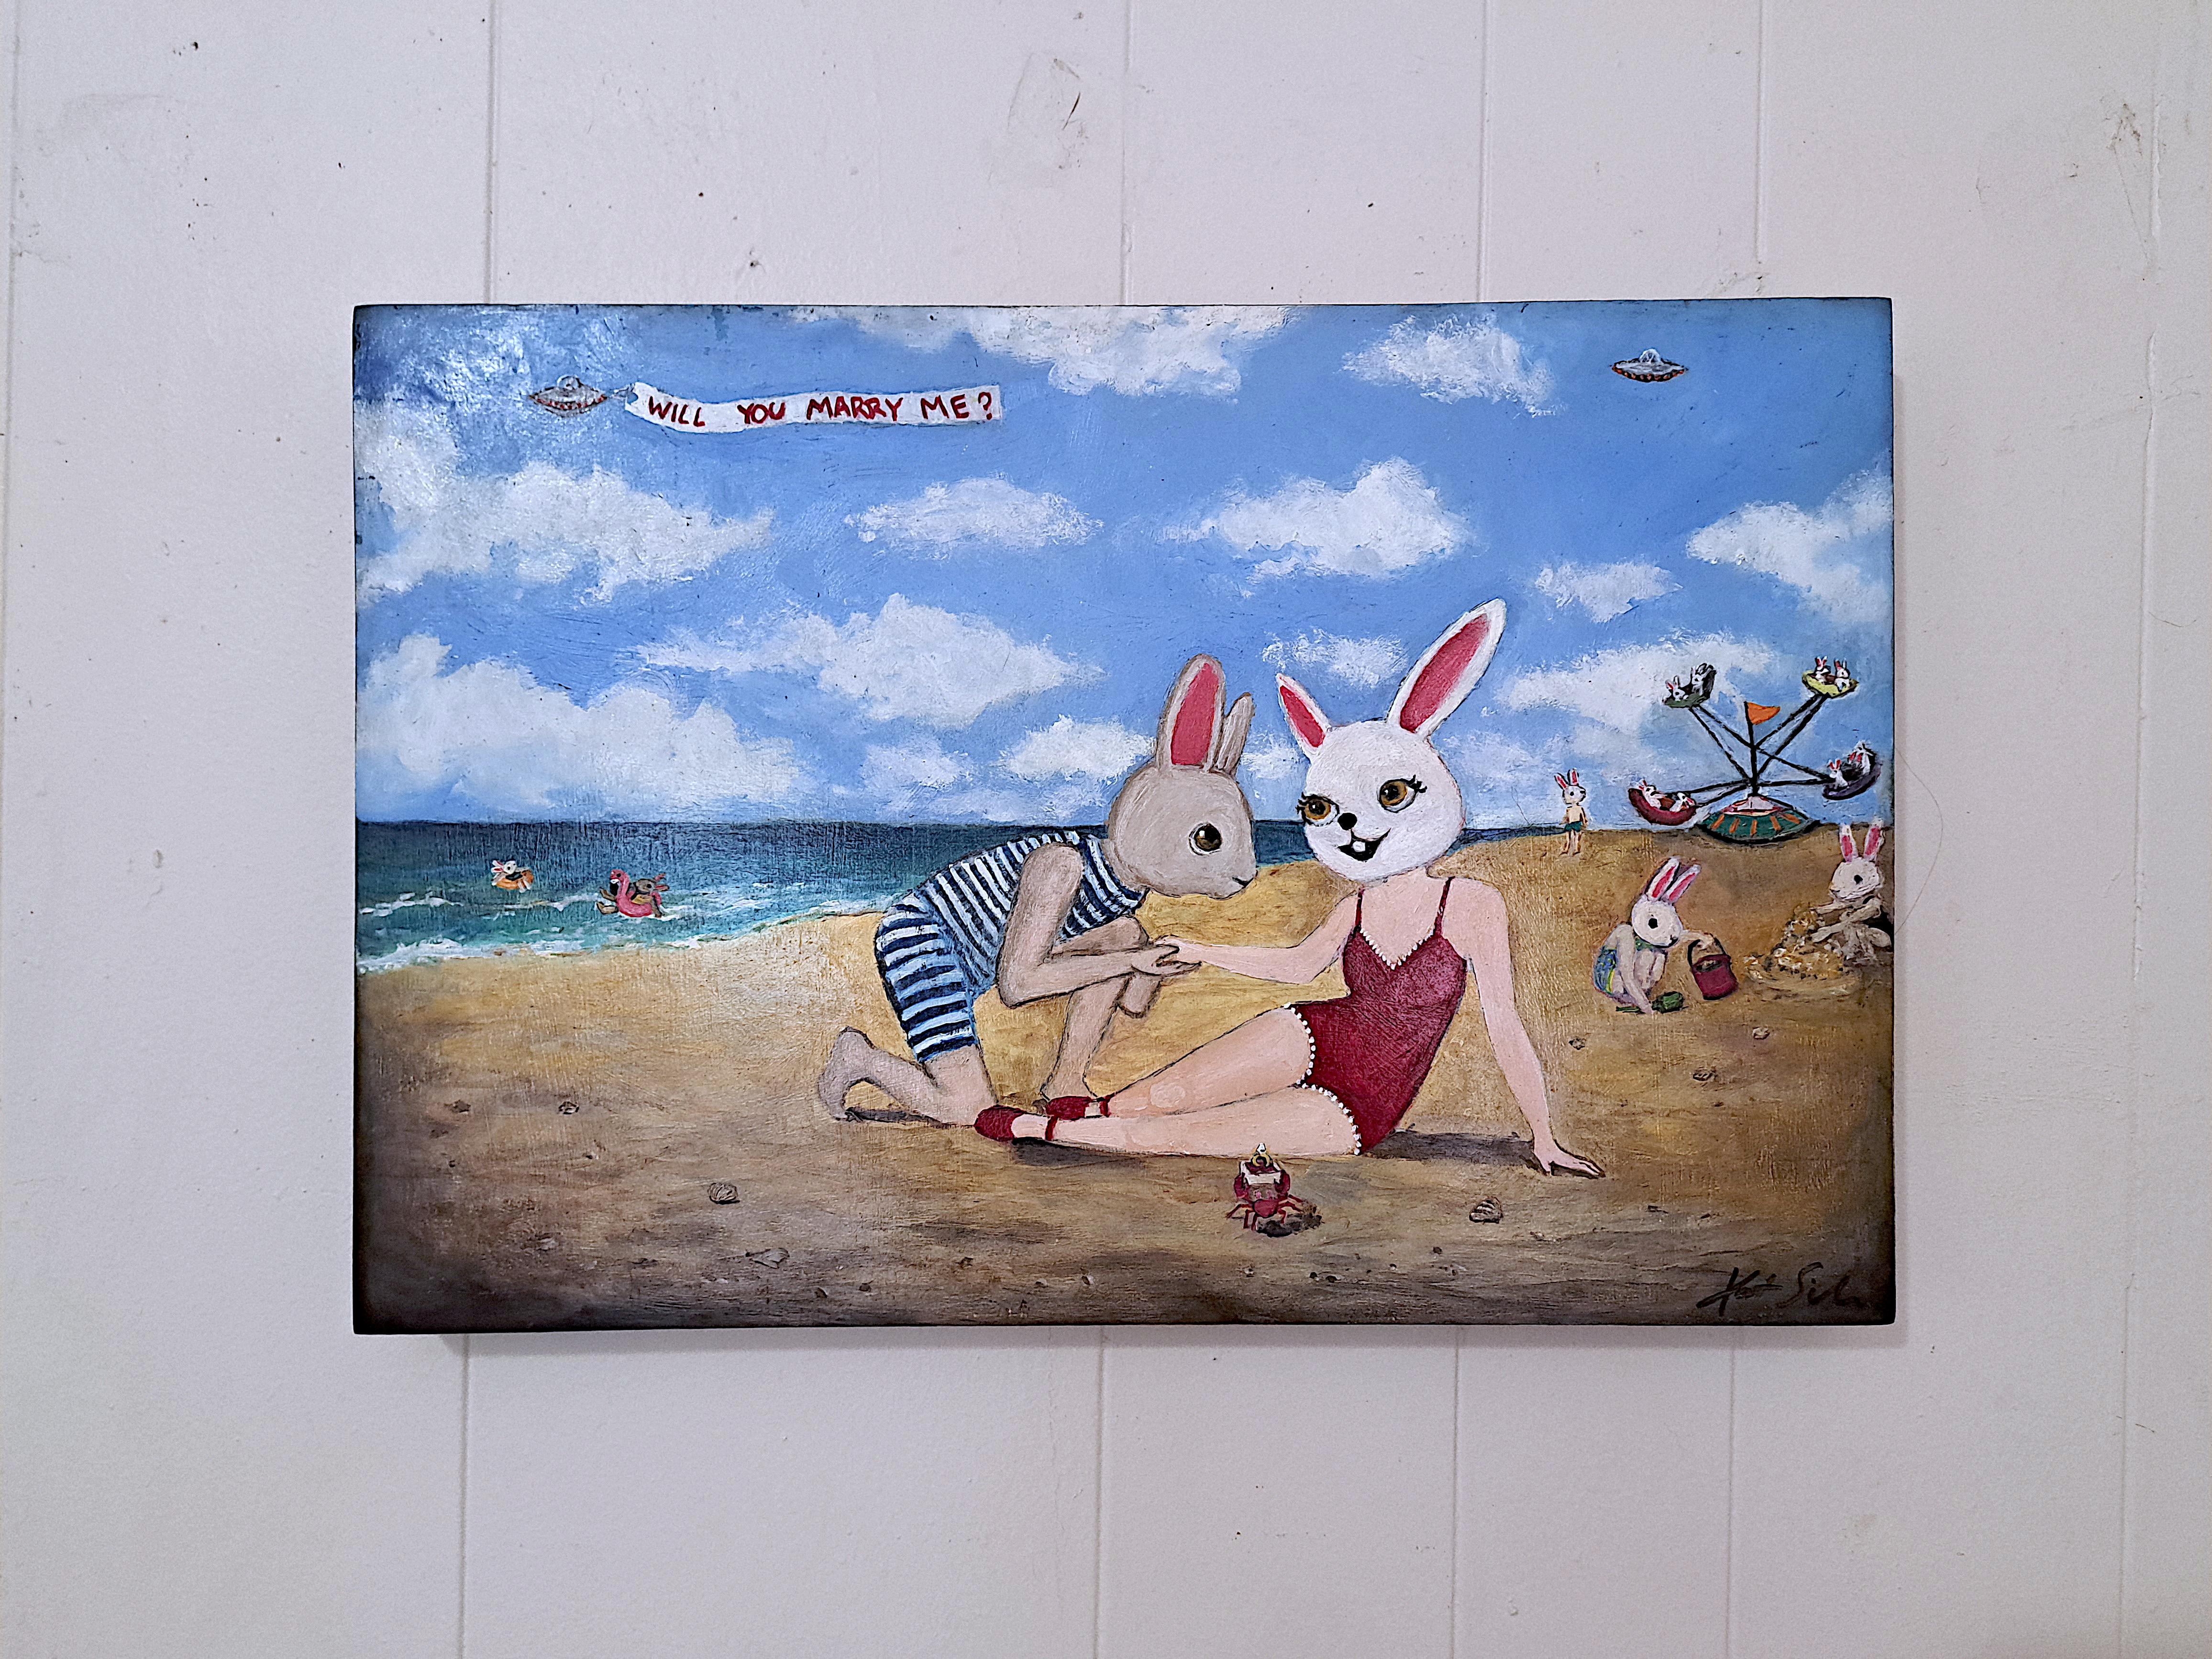 <p>Artist Comments<br>The scene depicts a beach where anthropomorphic rabbits are enjoying a sunny day. In the foreground, a bunny sits gracefully on the sandy shore while another kneels beside her. In the distance, a UFO hovers, displaying a banner